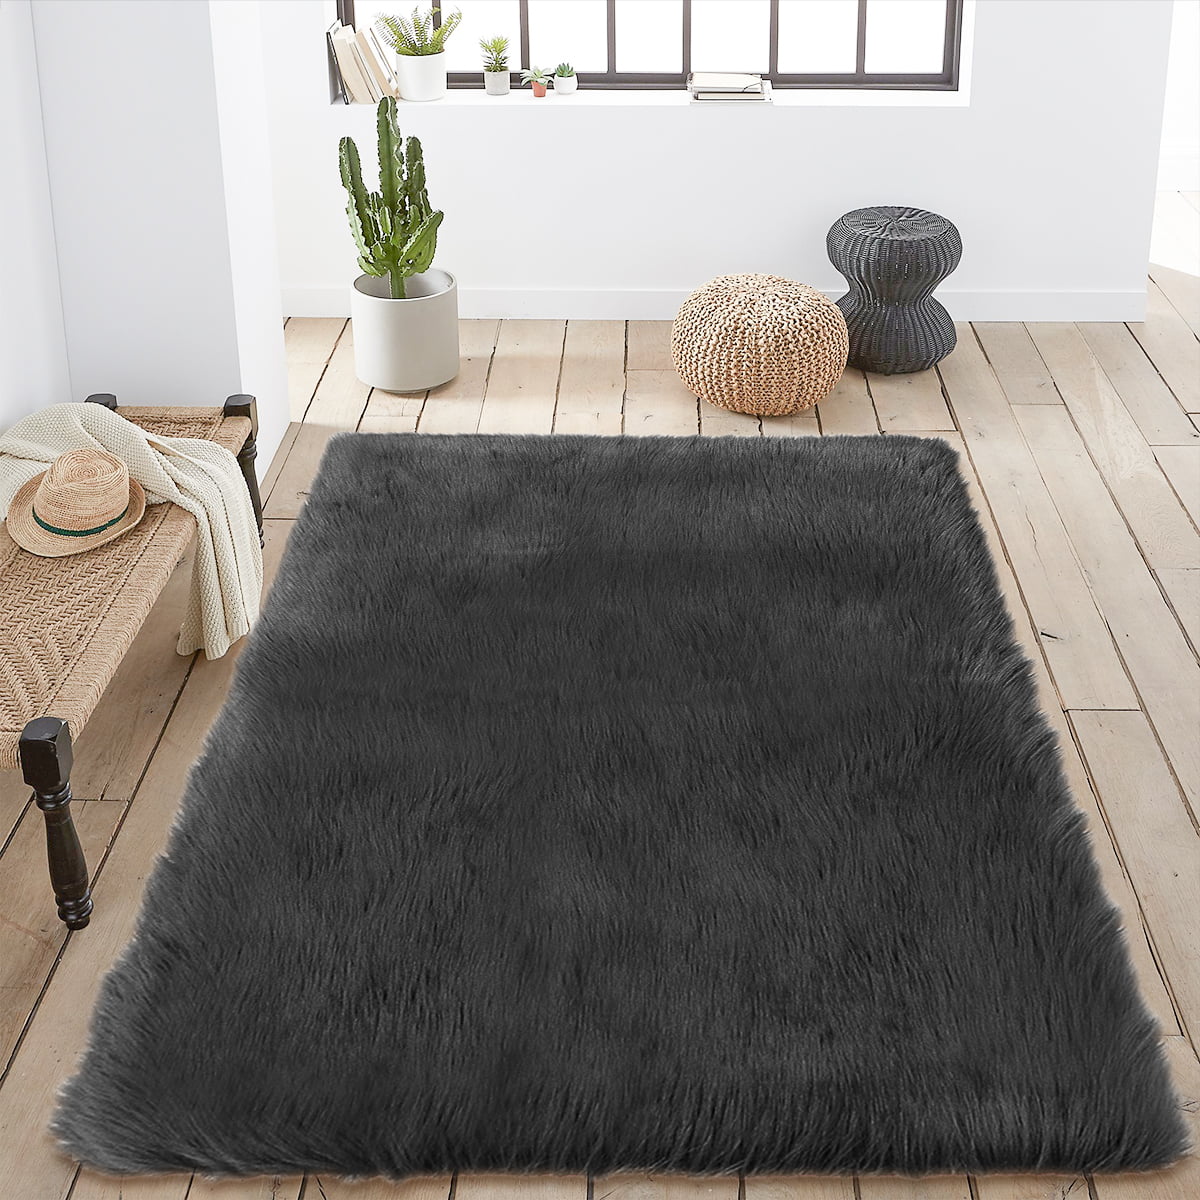 New Beautiful Soft & Thick Fluffy Mat Faux Fur Bedroom Modern Sheep-skin Rugs 